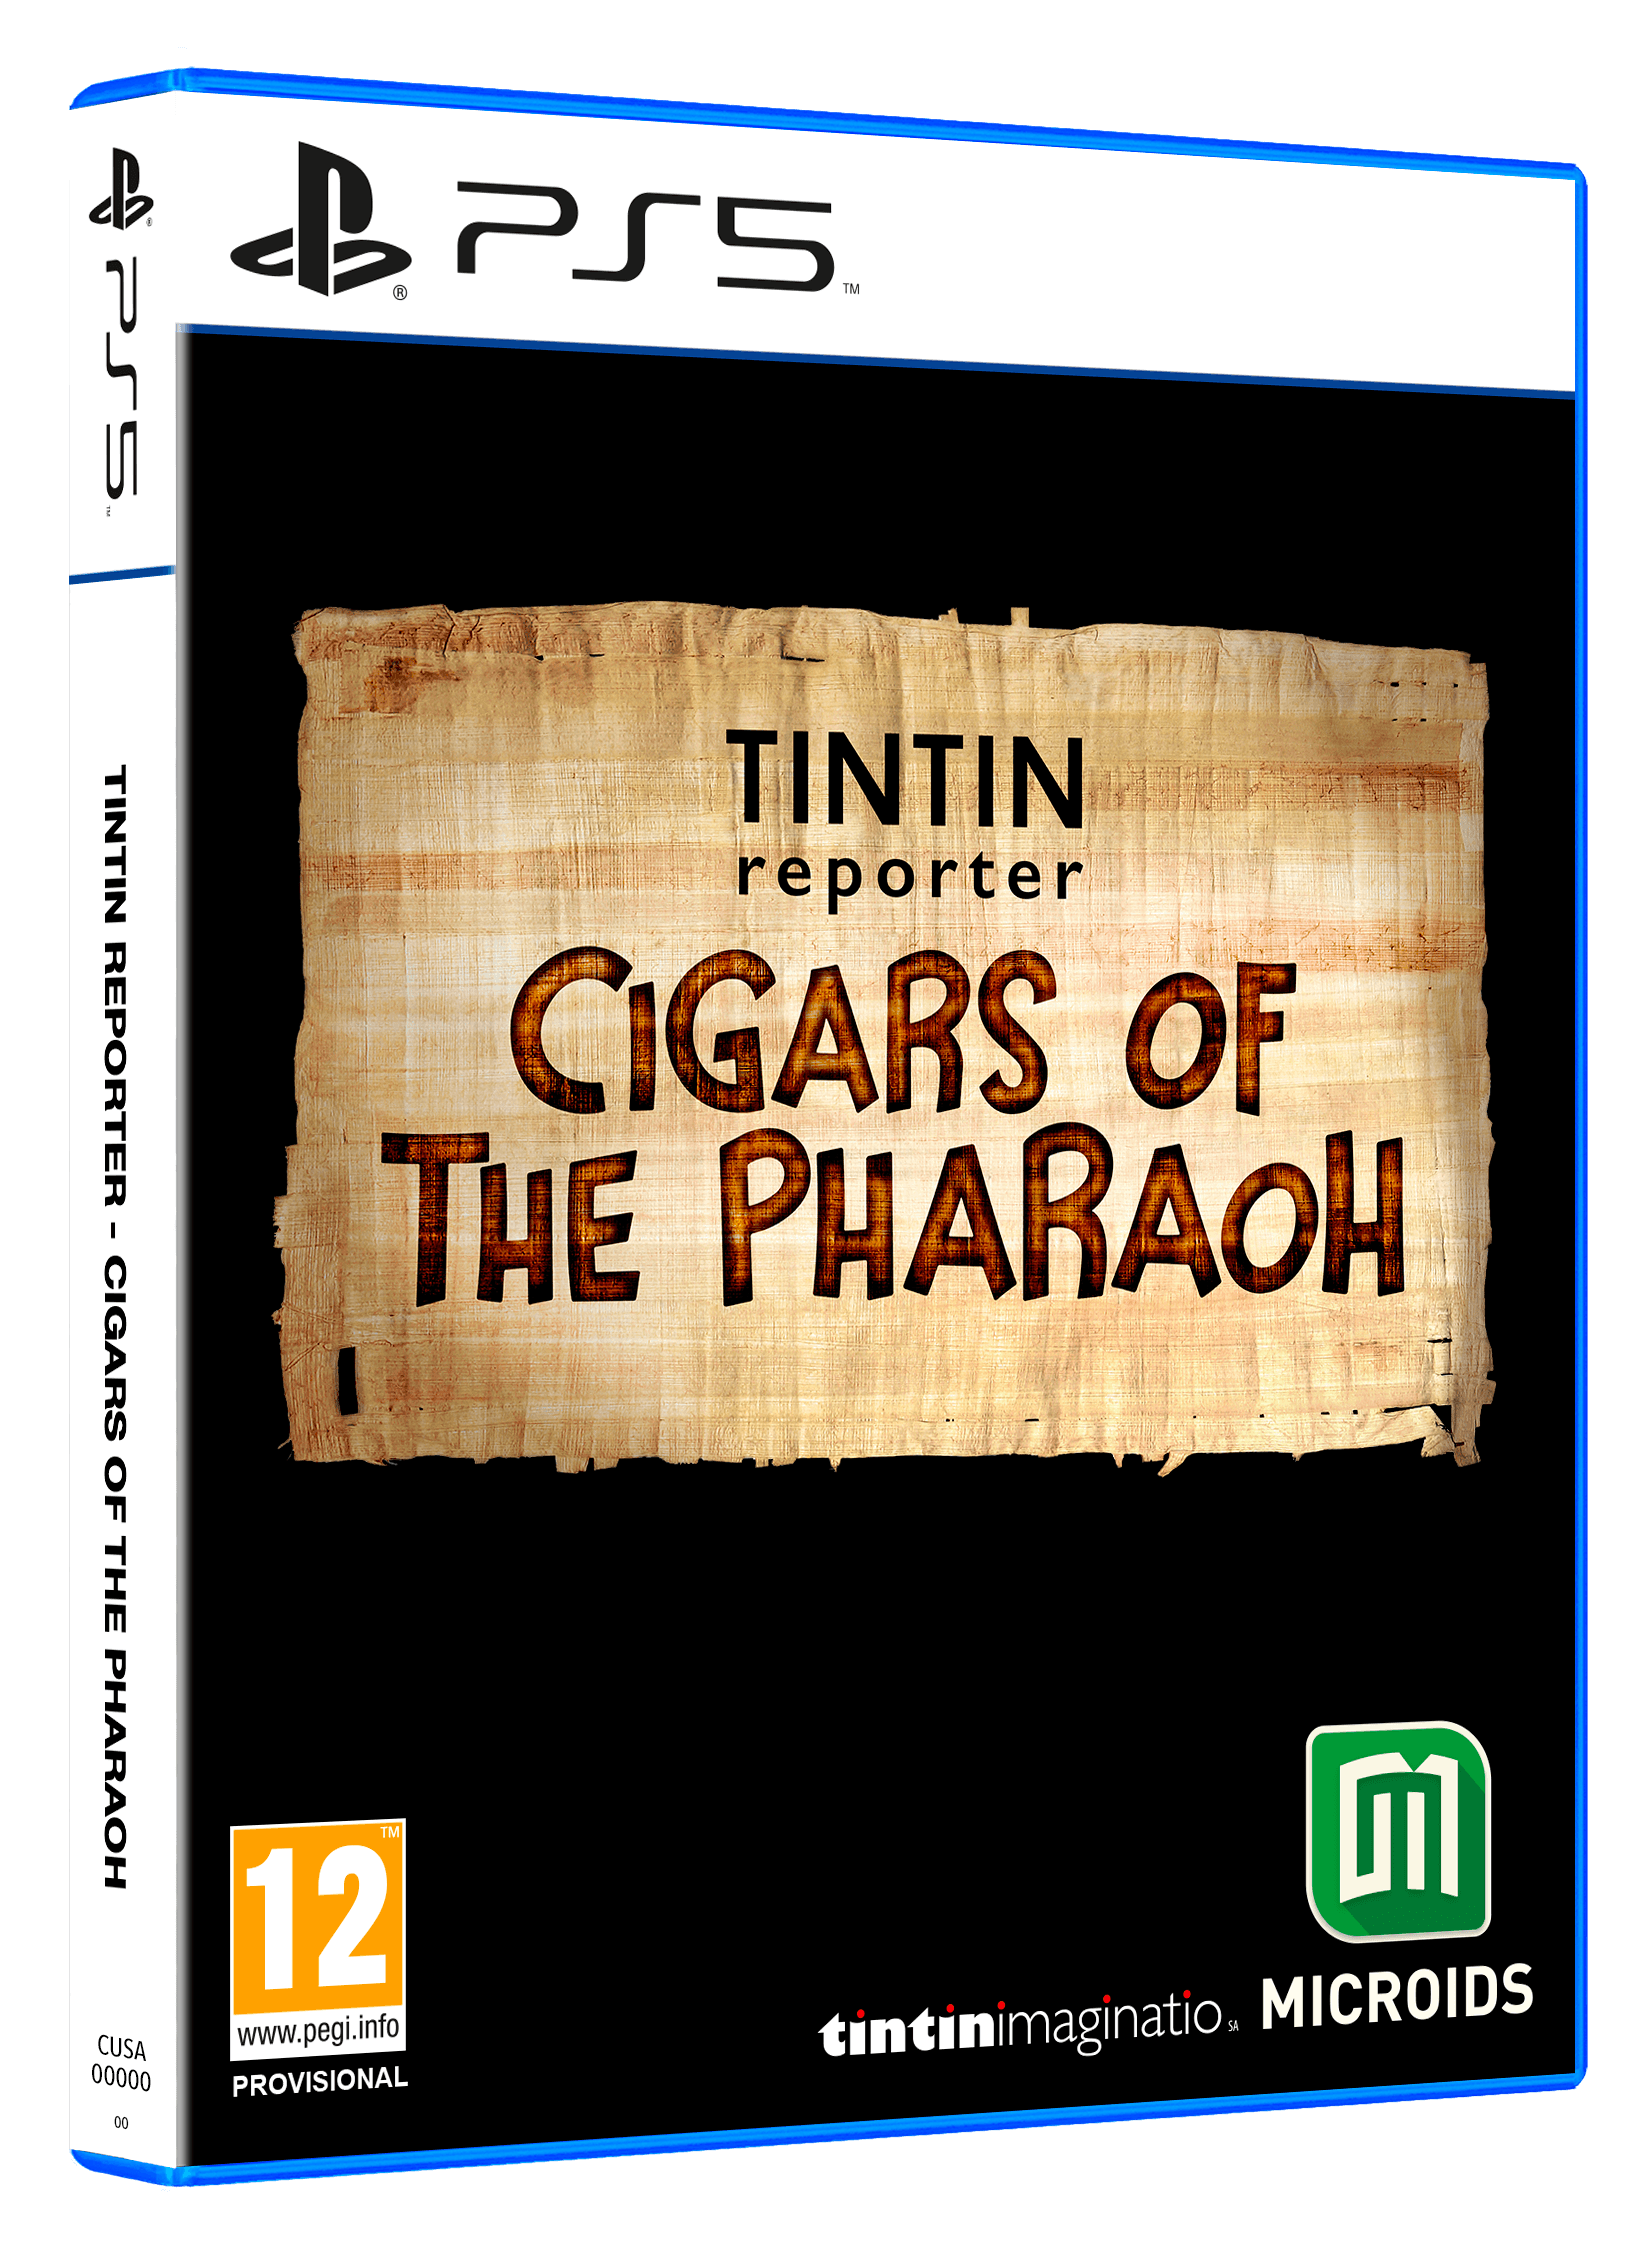 PlayStation 5 - Tintin Reporter: Cigars of the Pharaoh - Limited Edition - Want a New Gadget